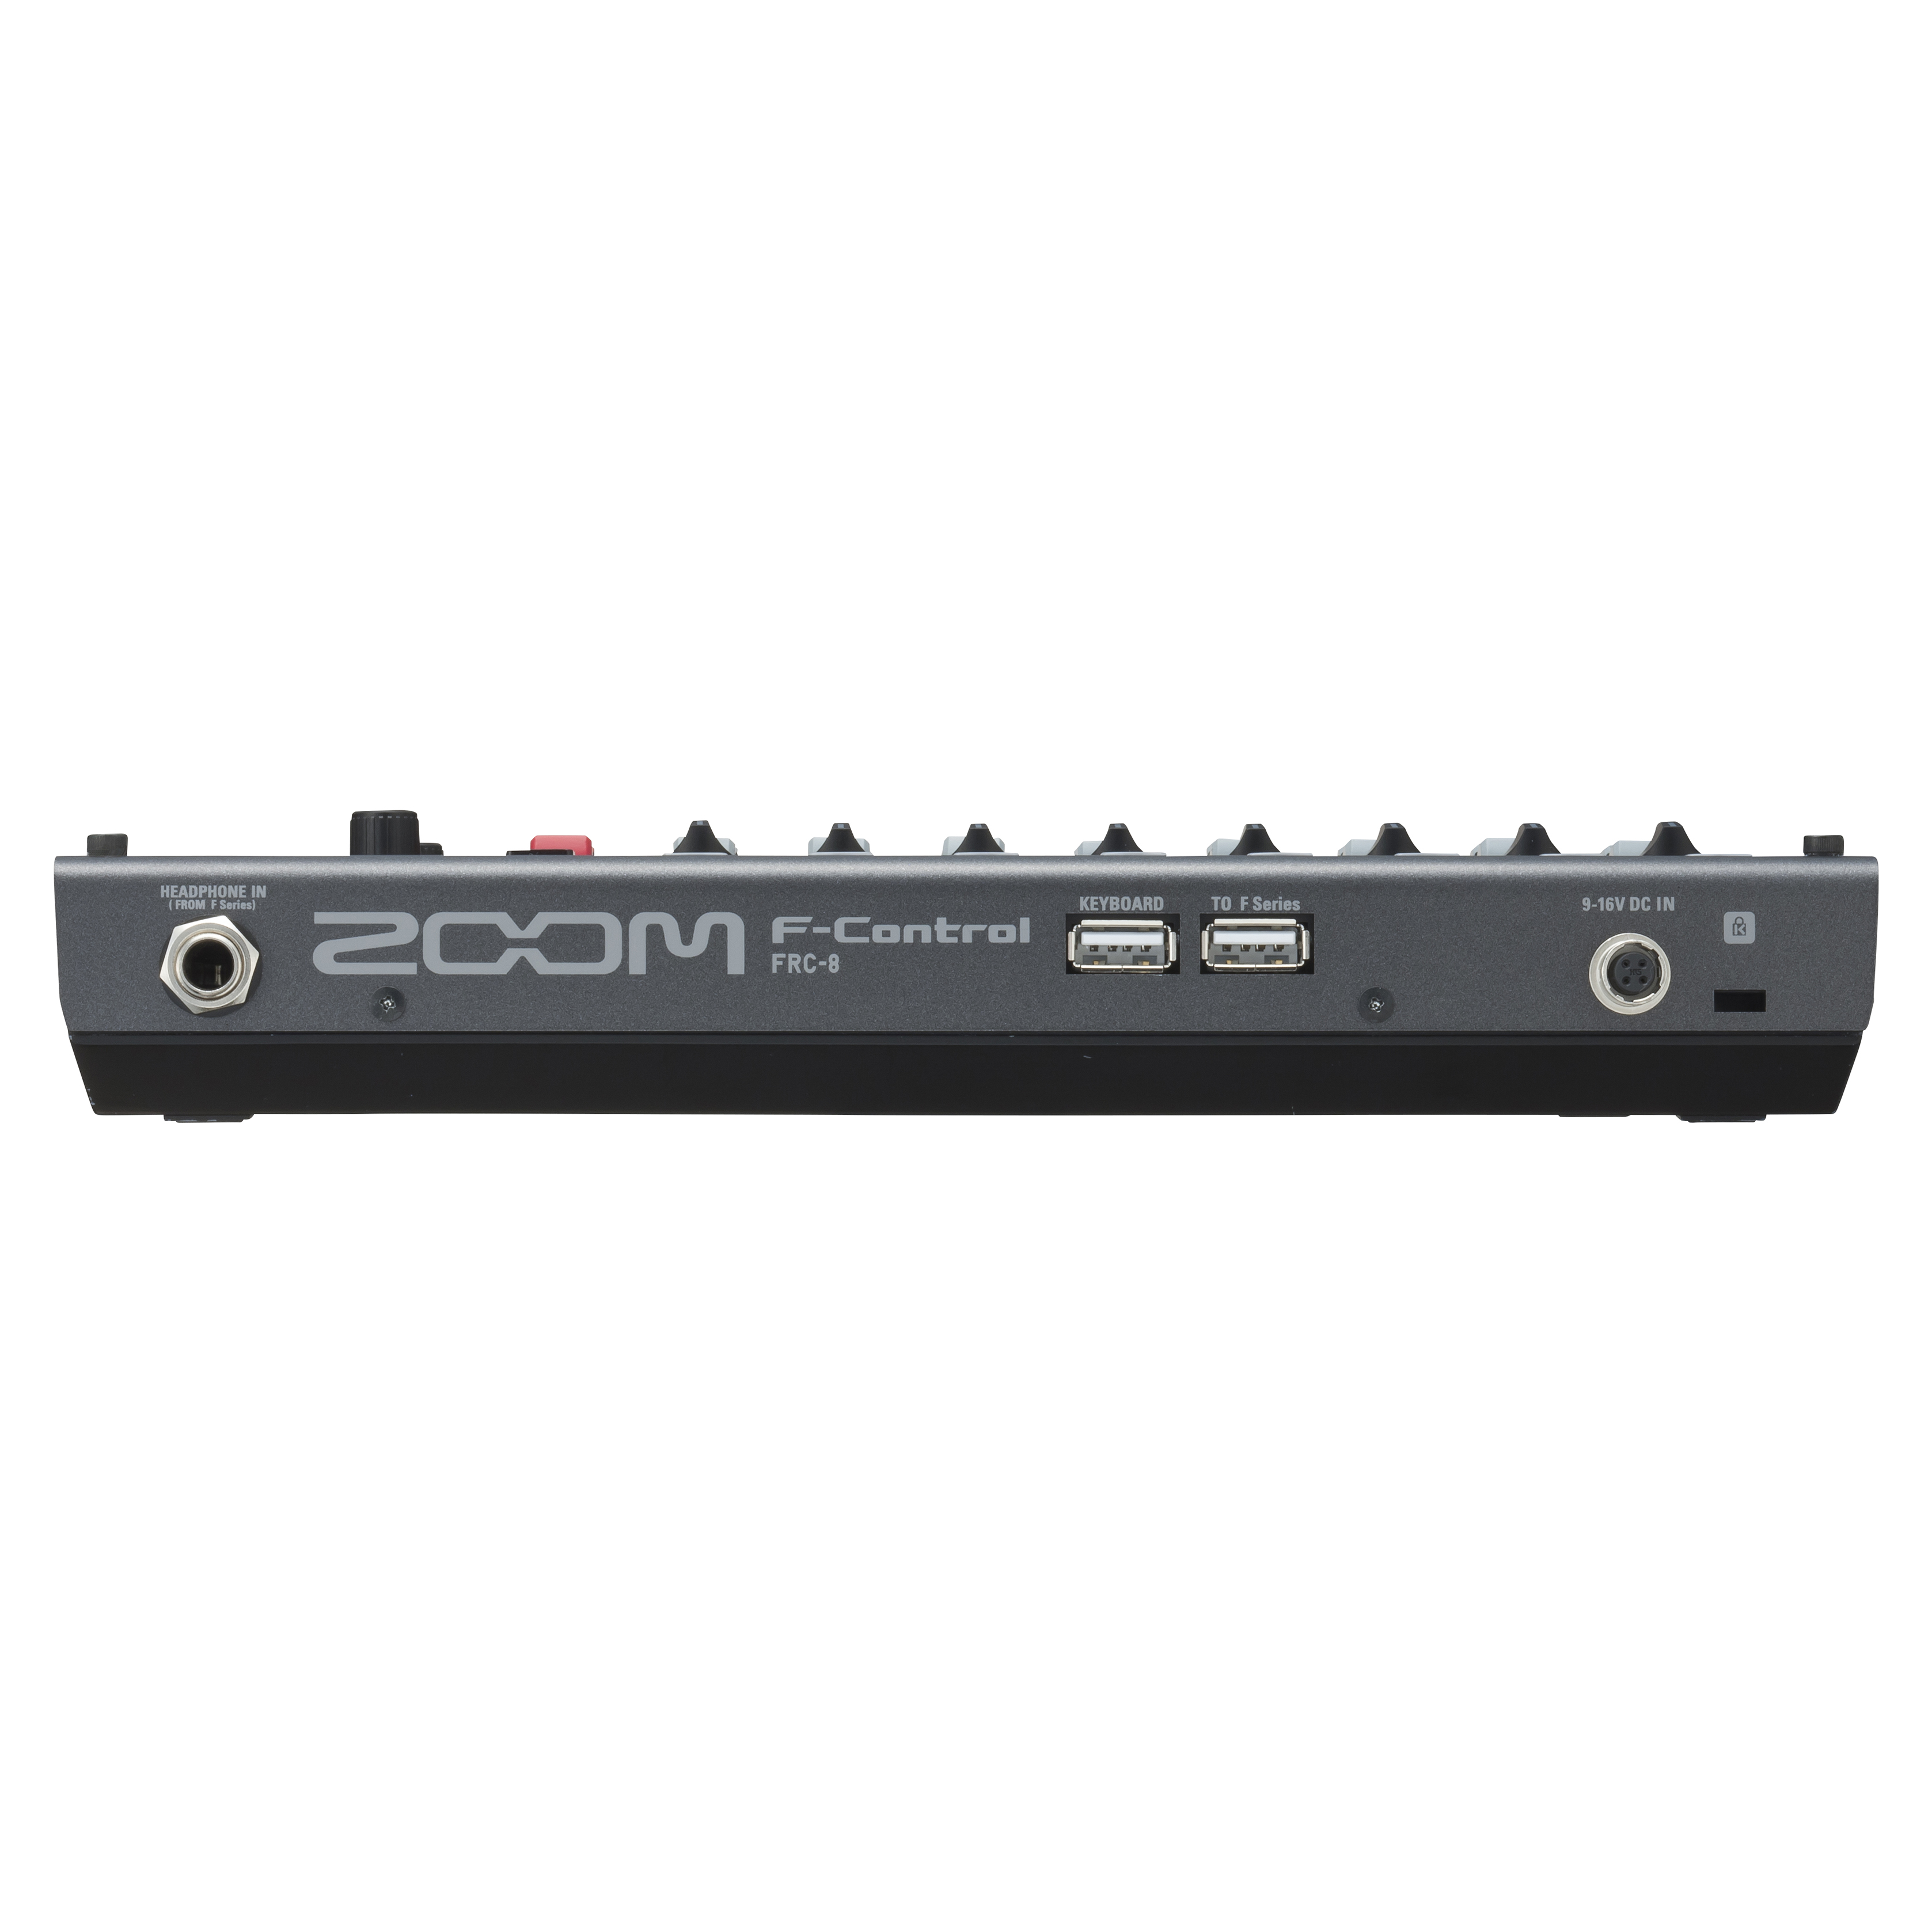 Zoom F-control Frc-8 - Mehrspur-Recorder - Variation 2